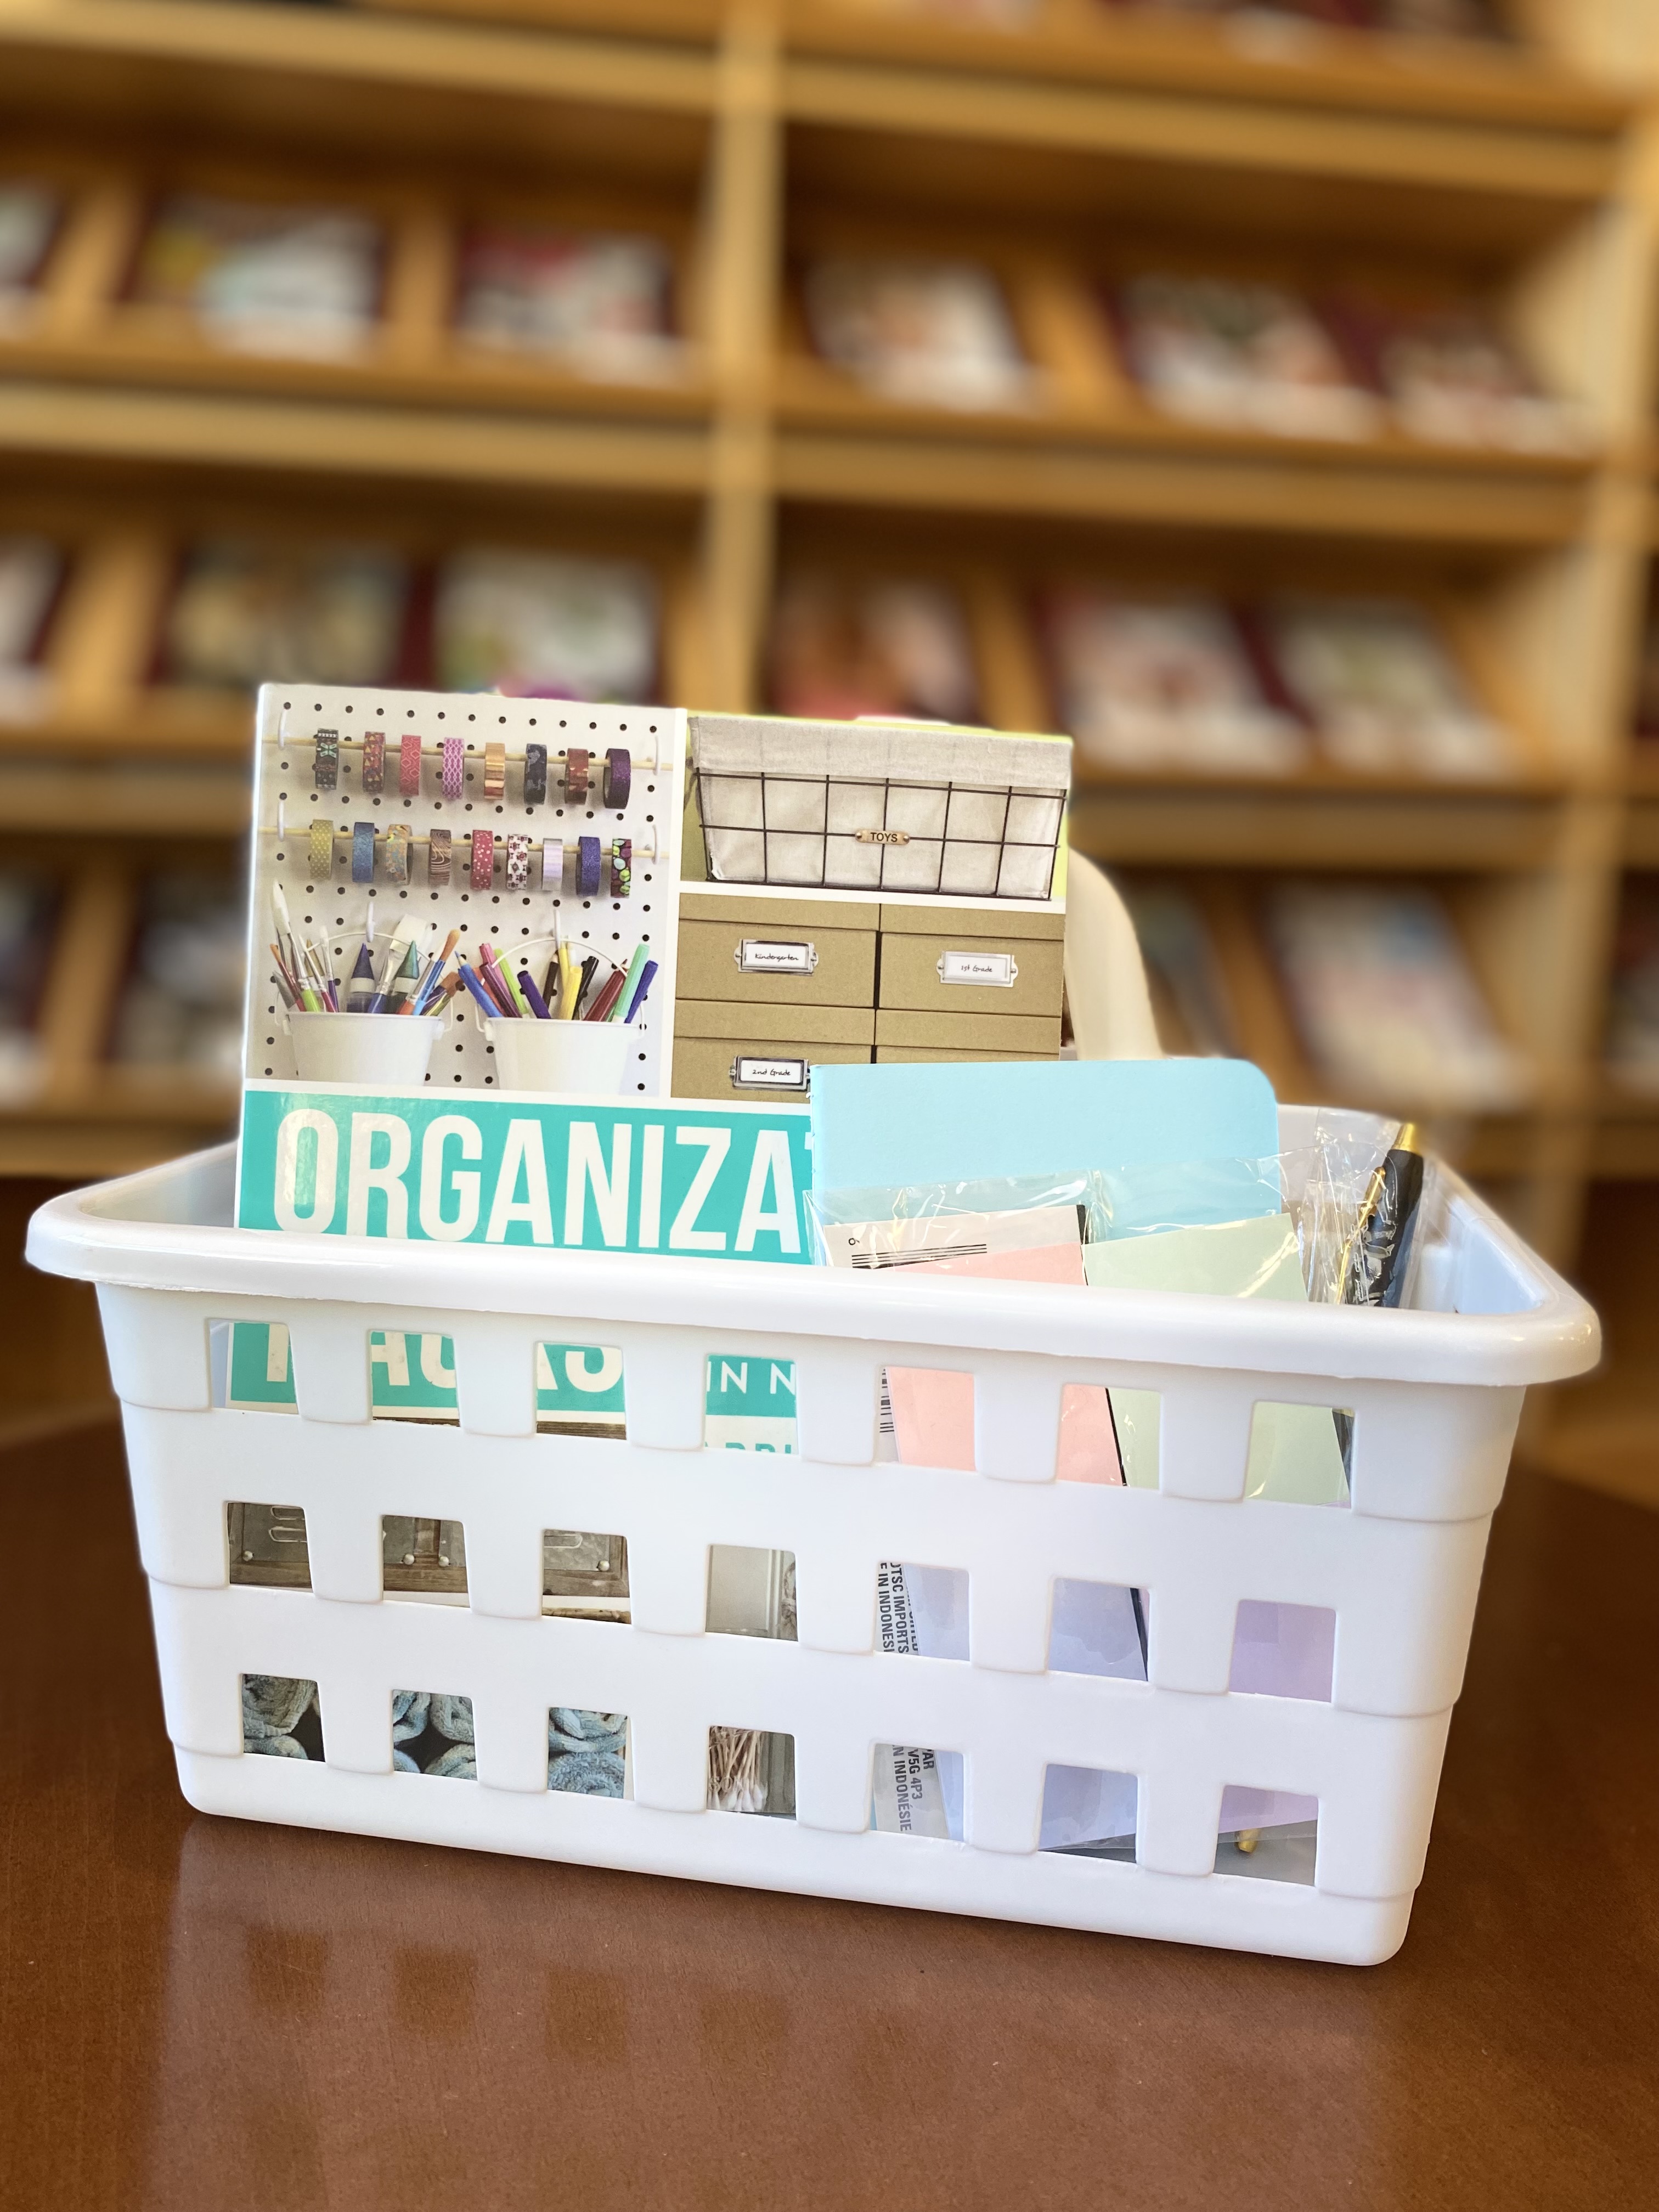 Organization hacks book, white basket, notepads, and a pen